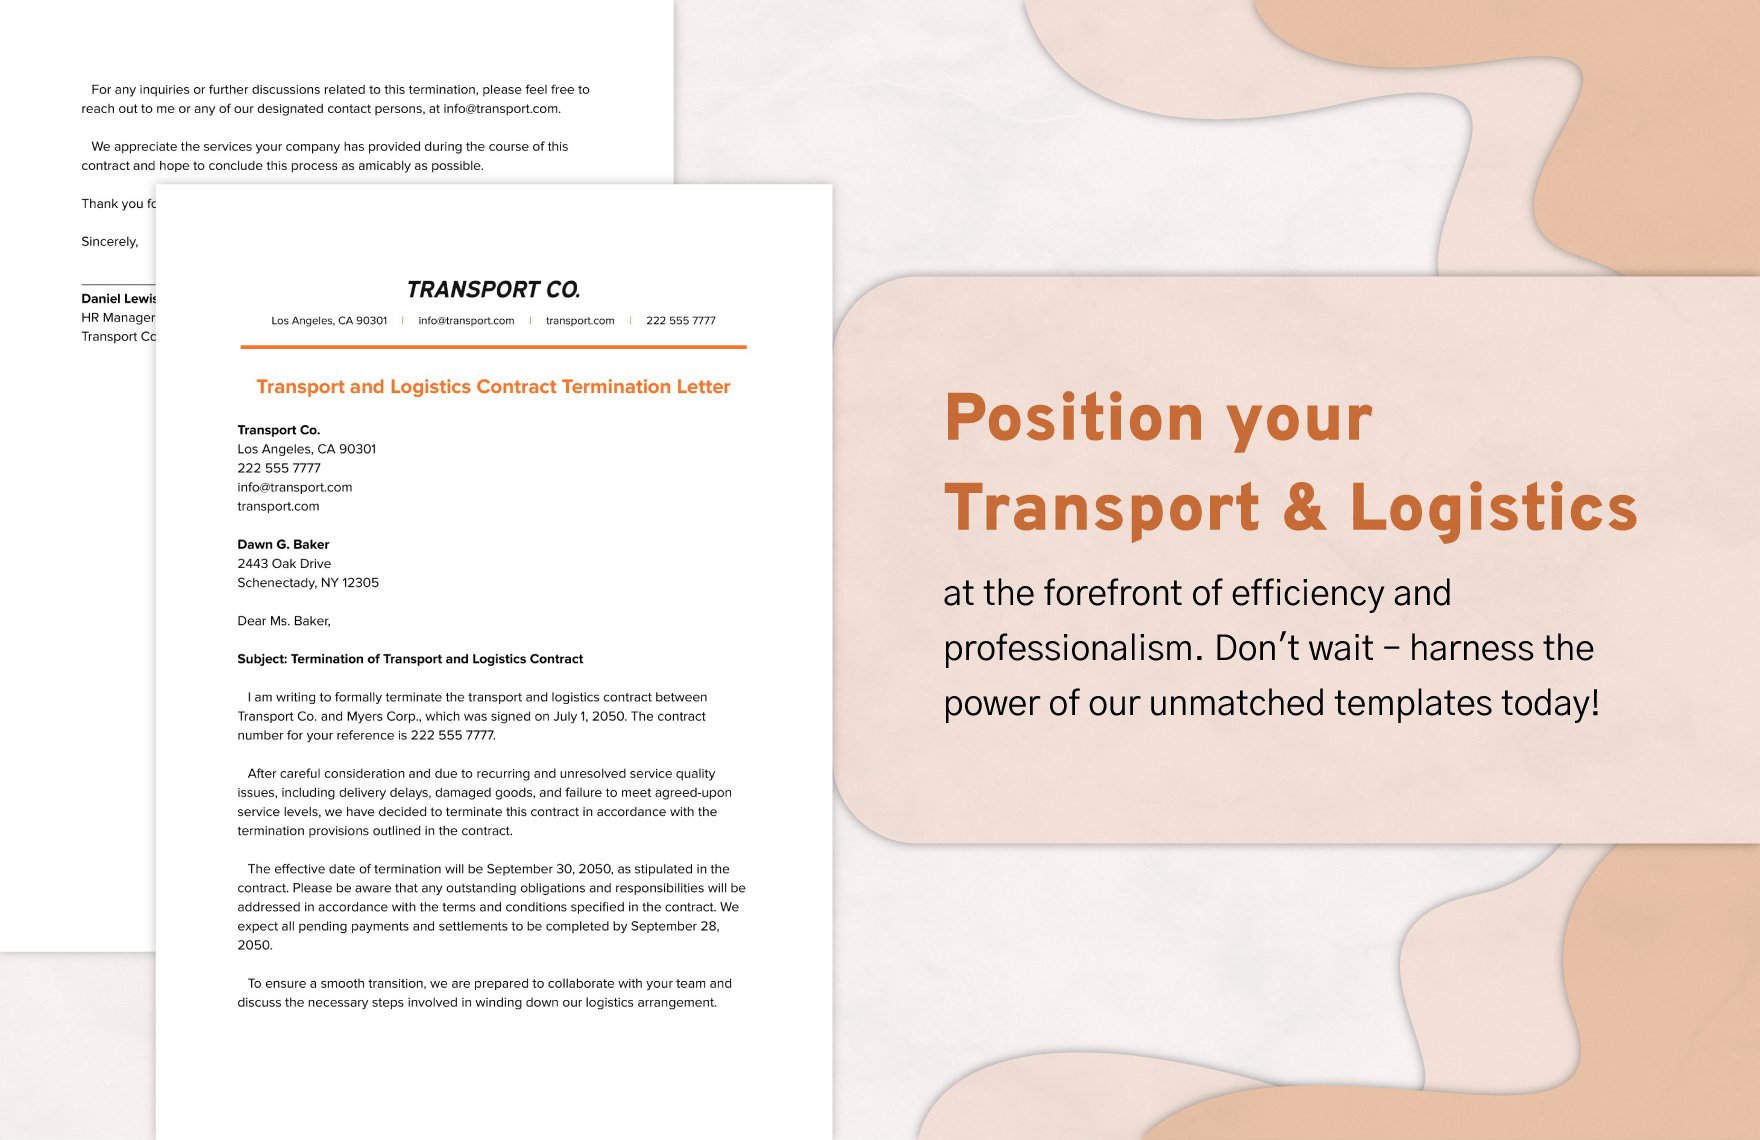 Transport and Logistics Contract Termination Letter Template